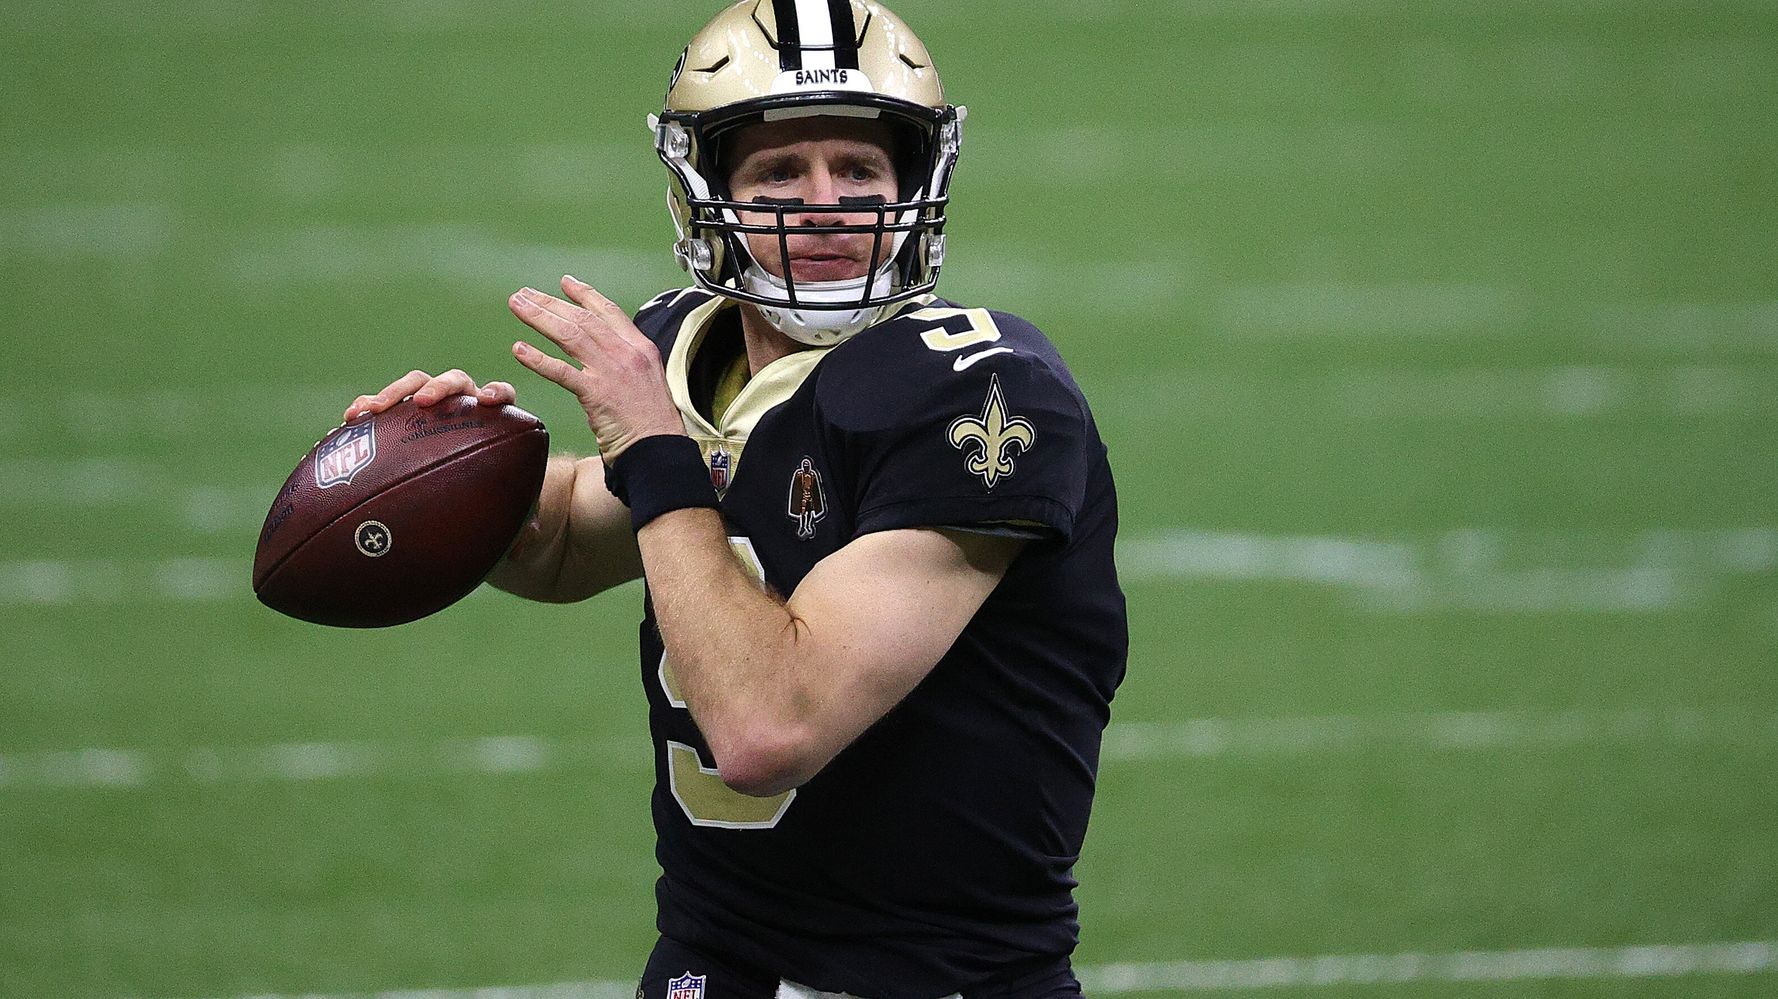 Drew Brees reveals his next career move after announcing his retirement from the NFL